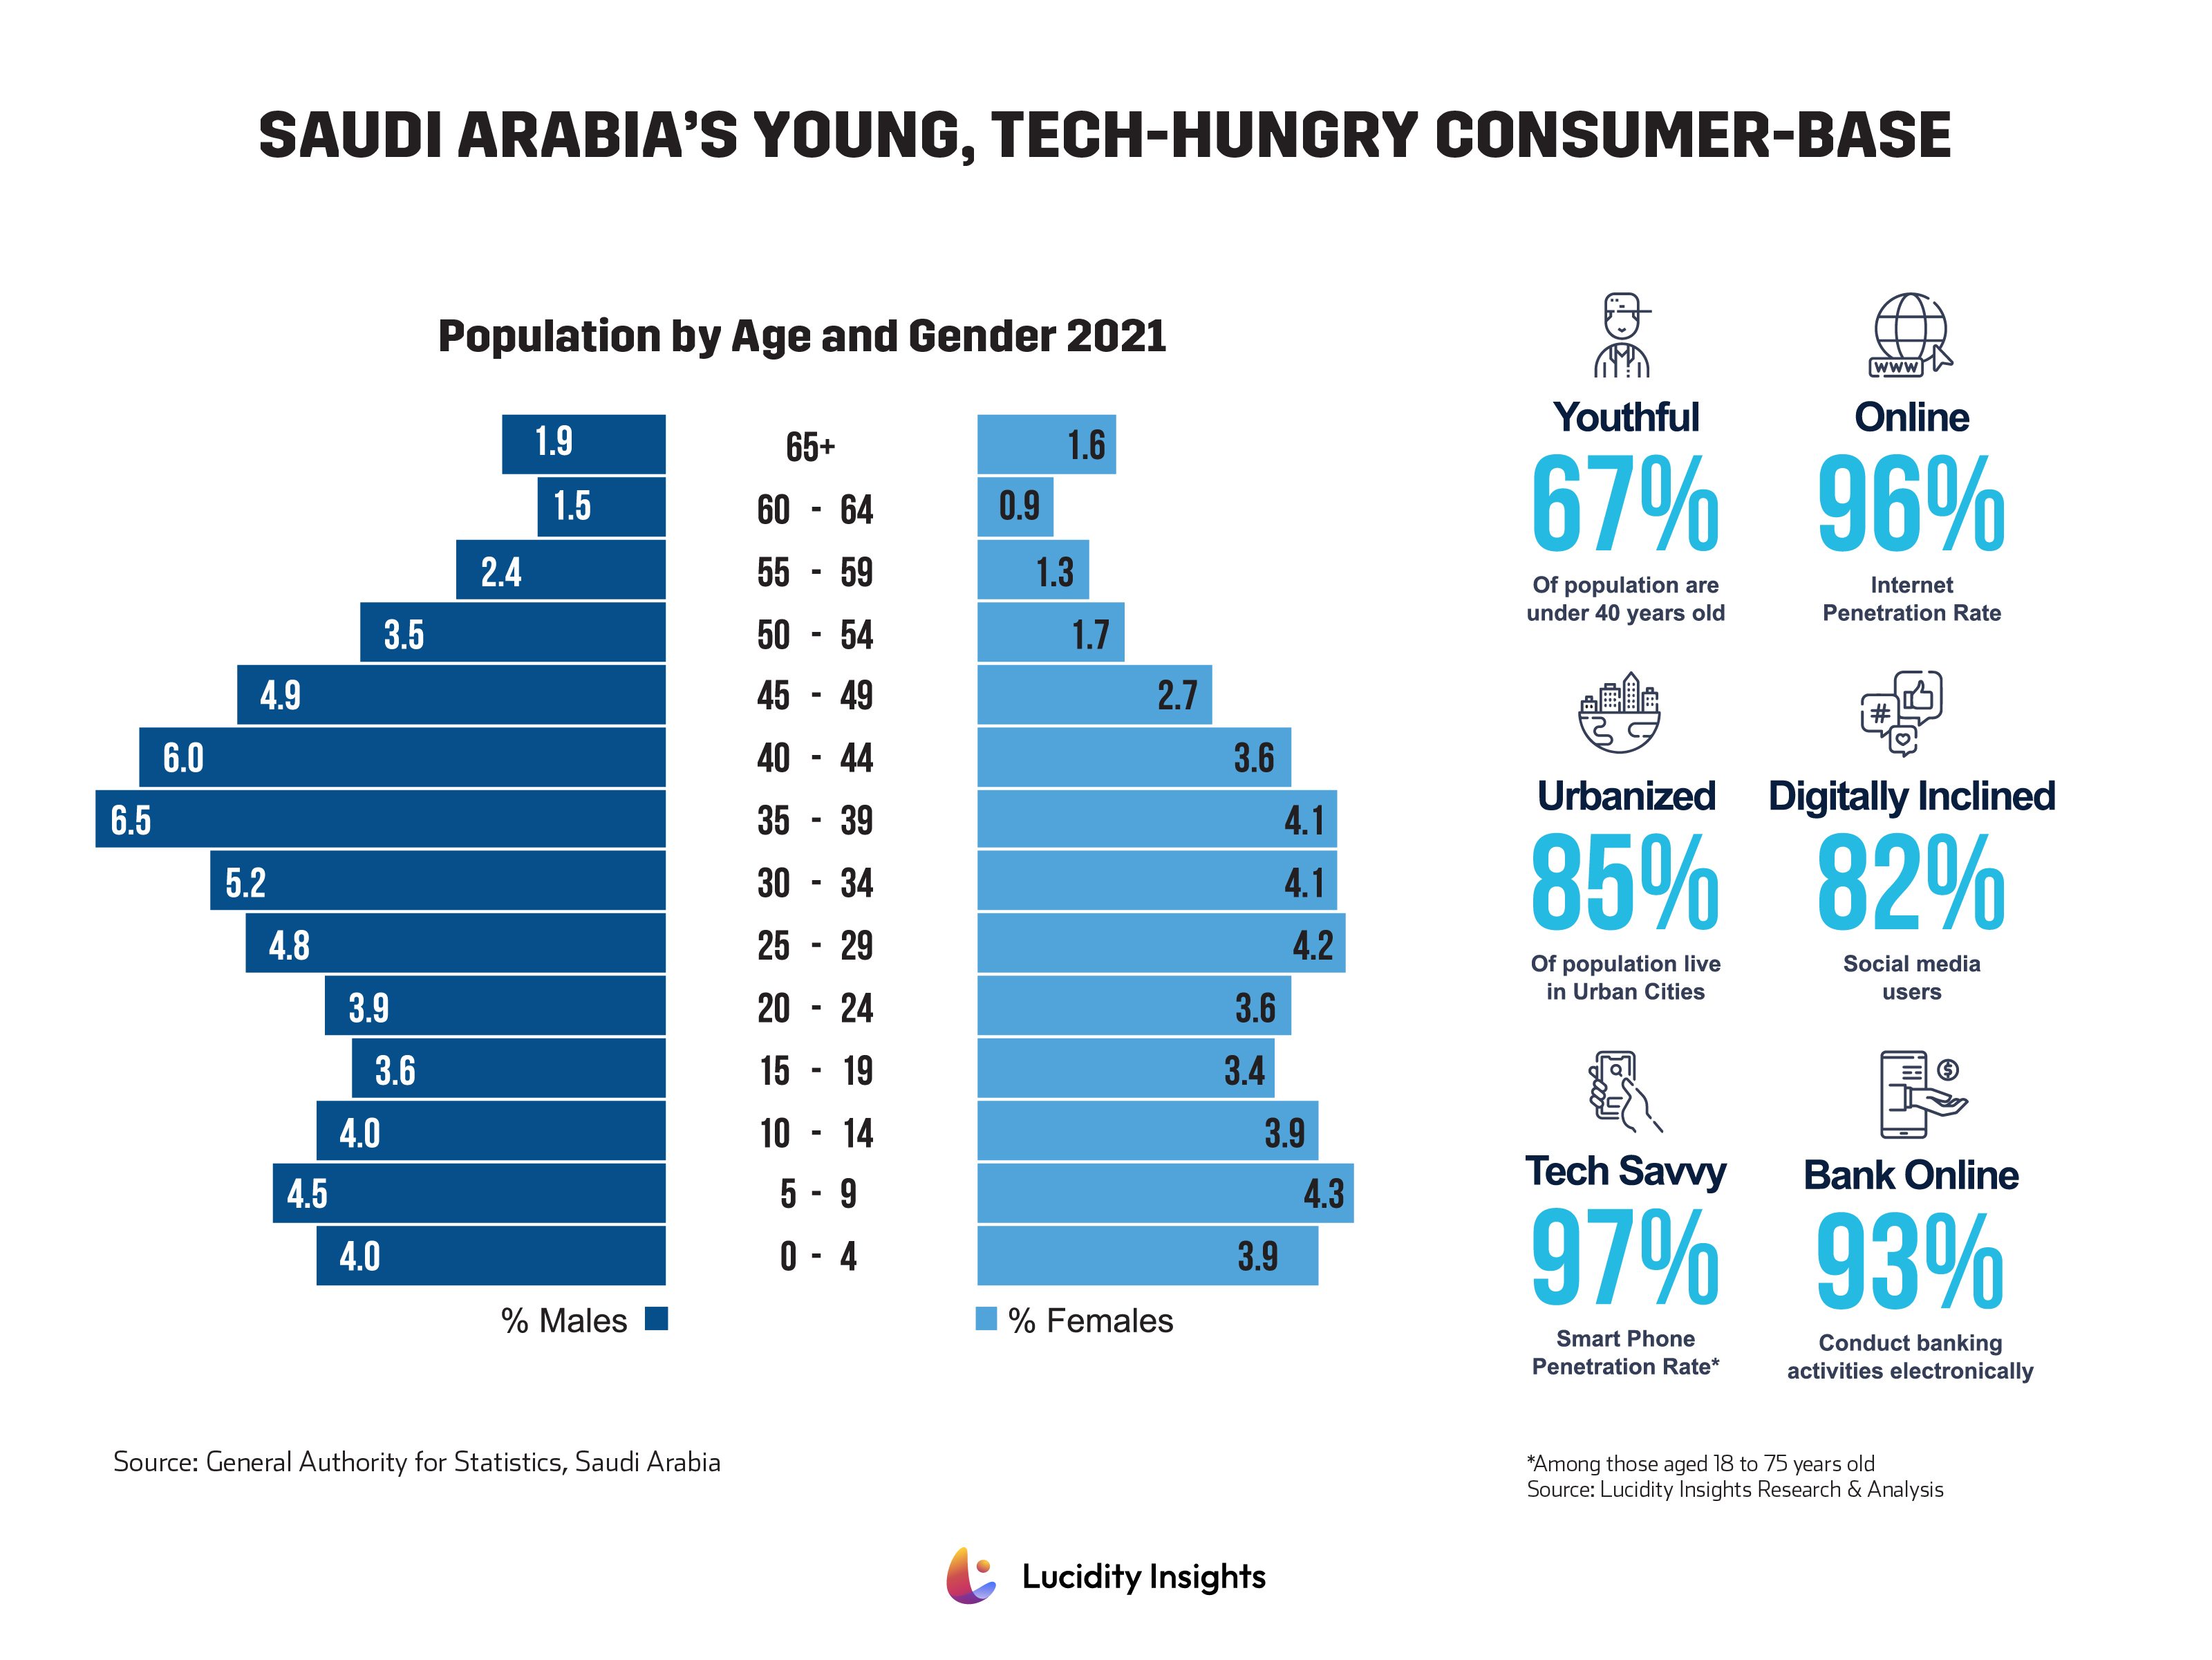 KSA Young & Tech Hungry Consumer  Base: Saudi Arabia's Population by Age and Gender 2021.